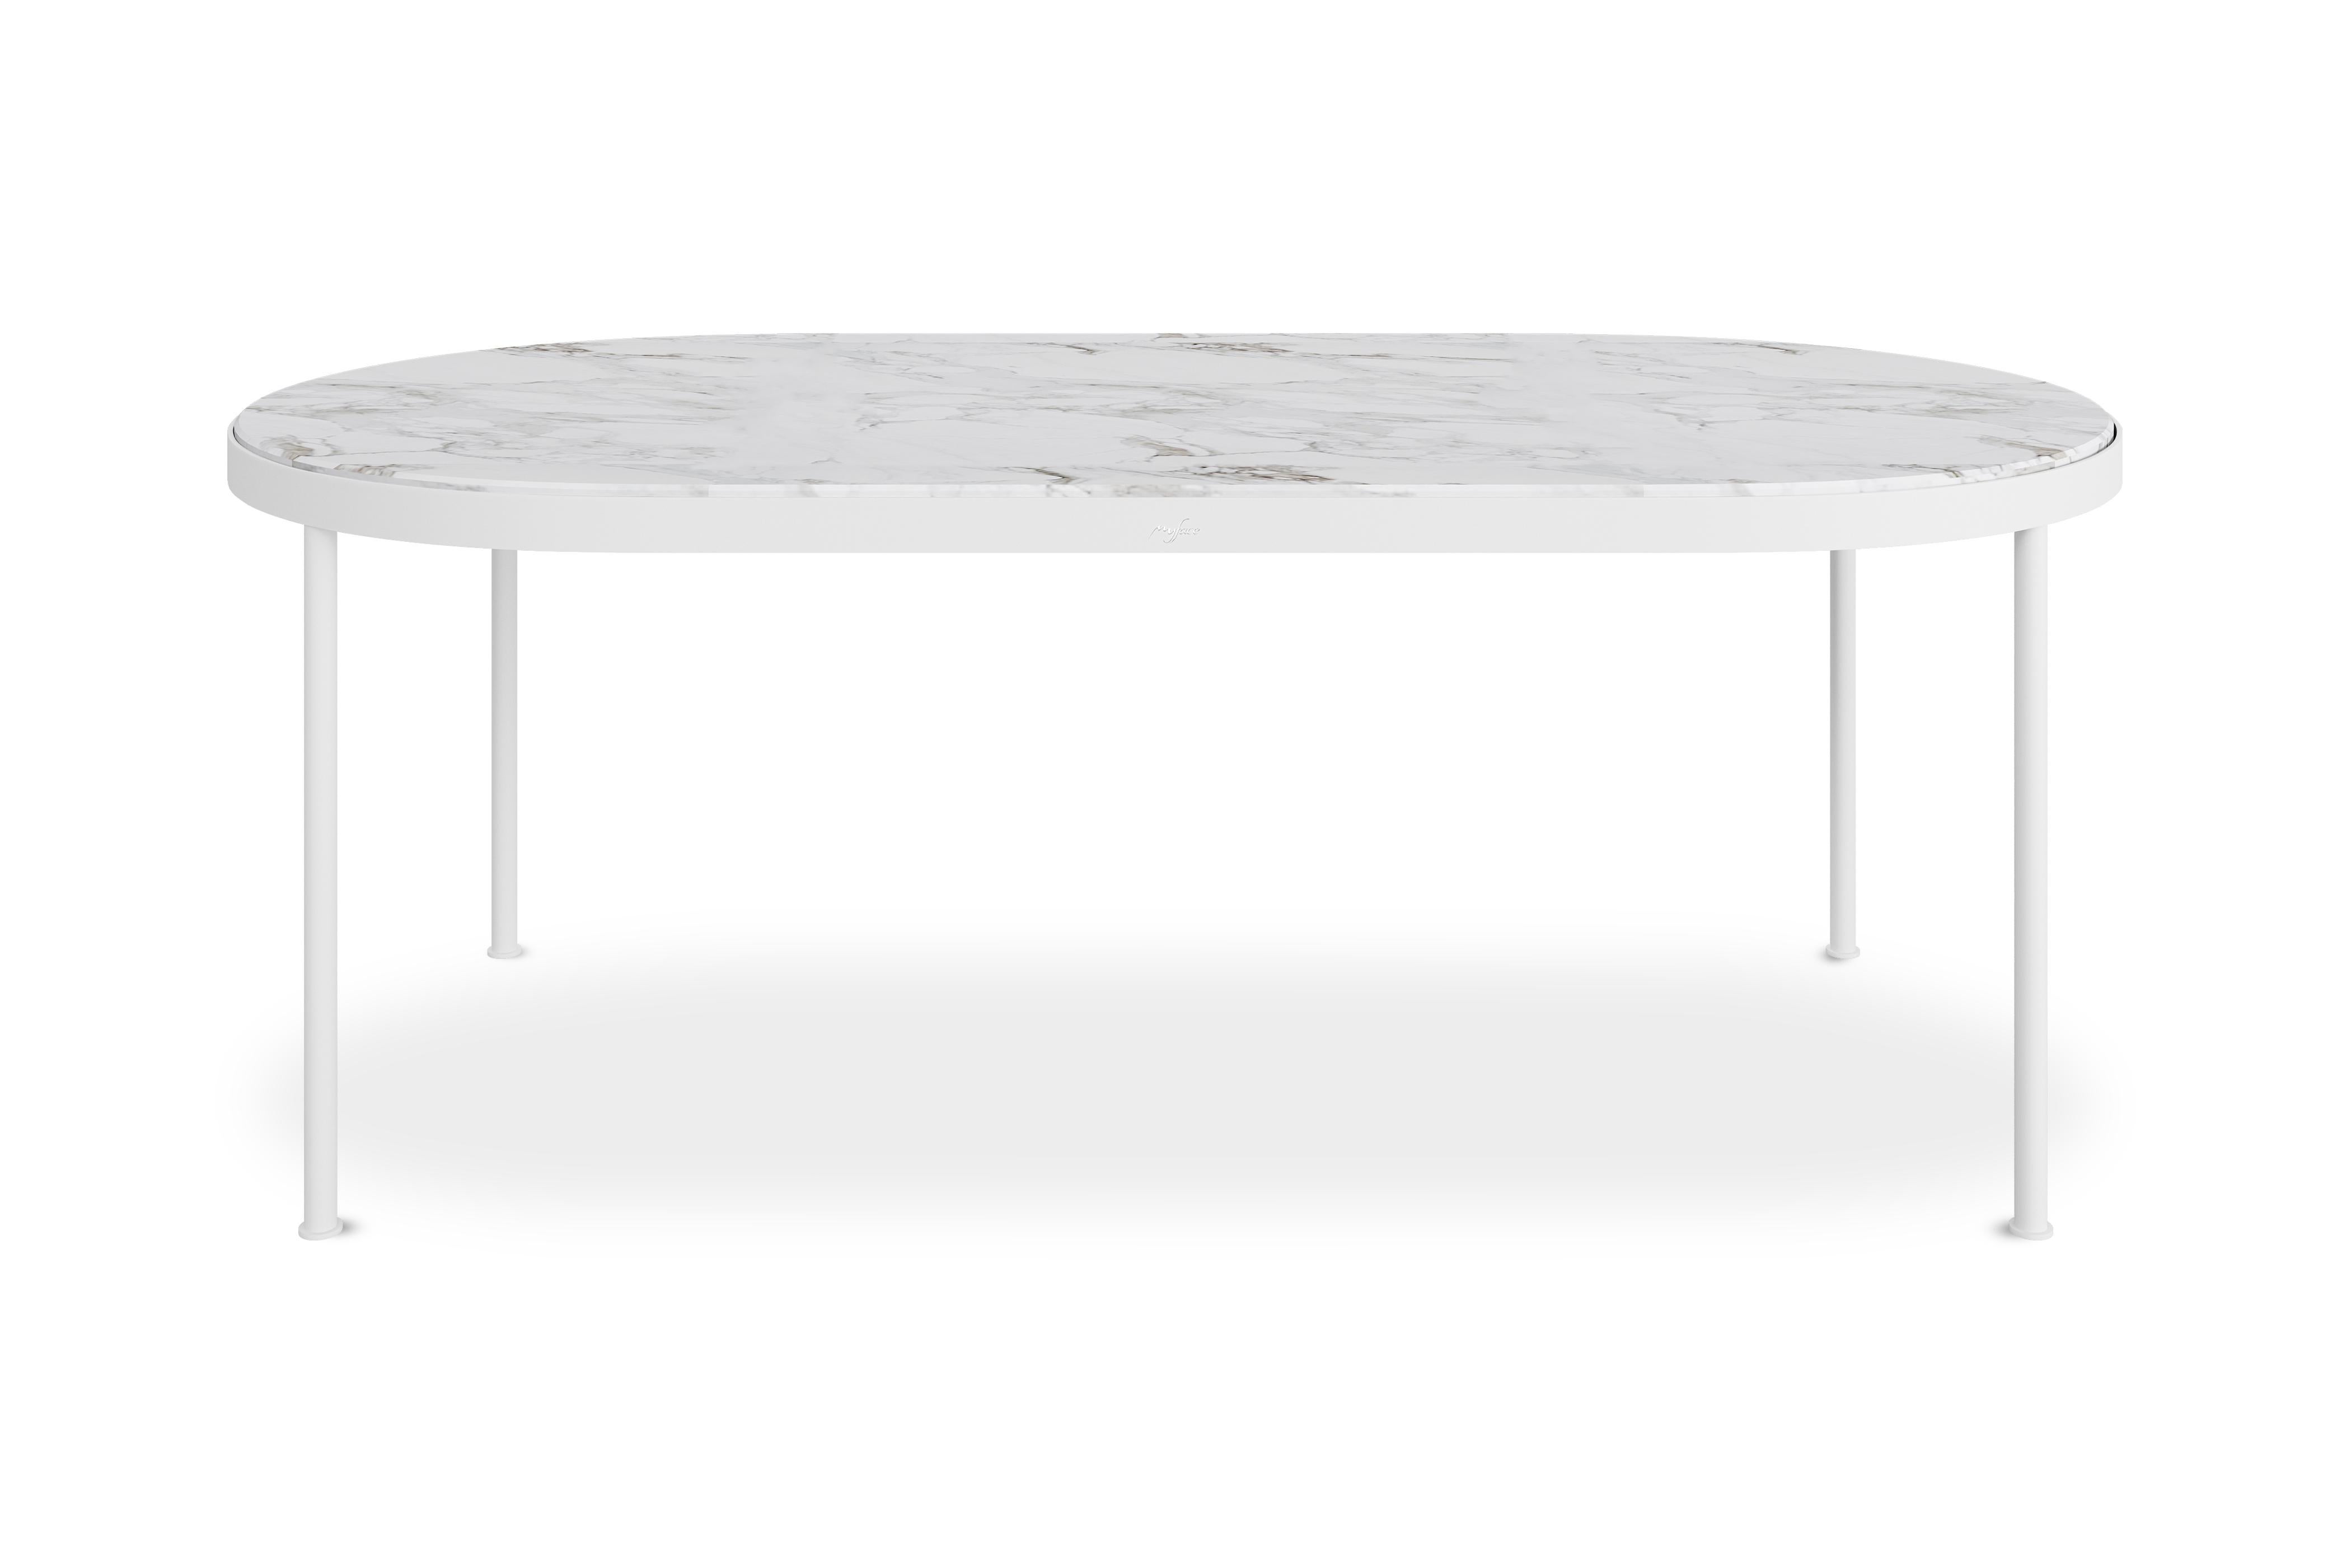 marble top outdoor dining table